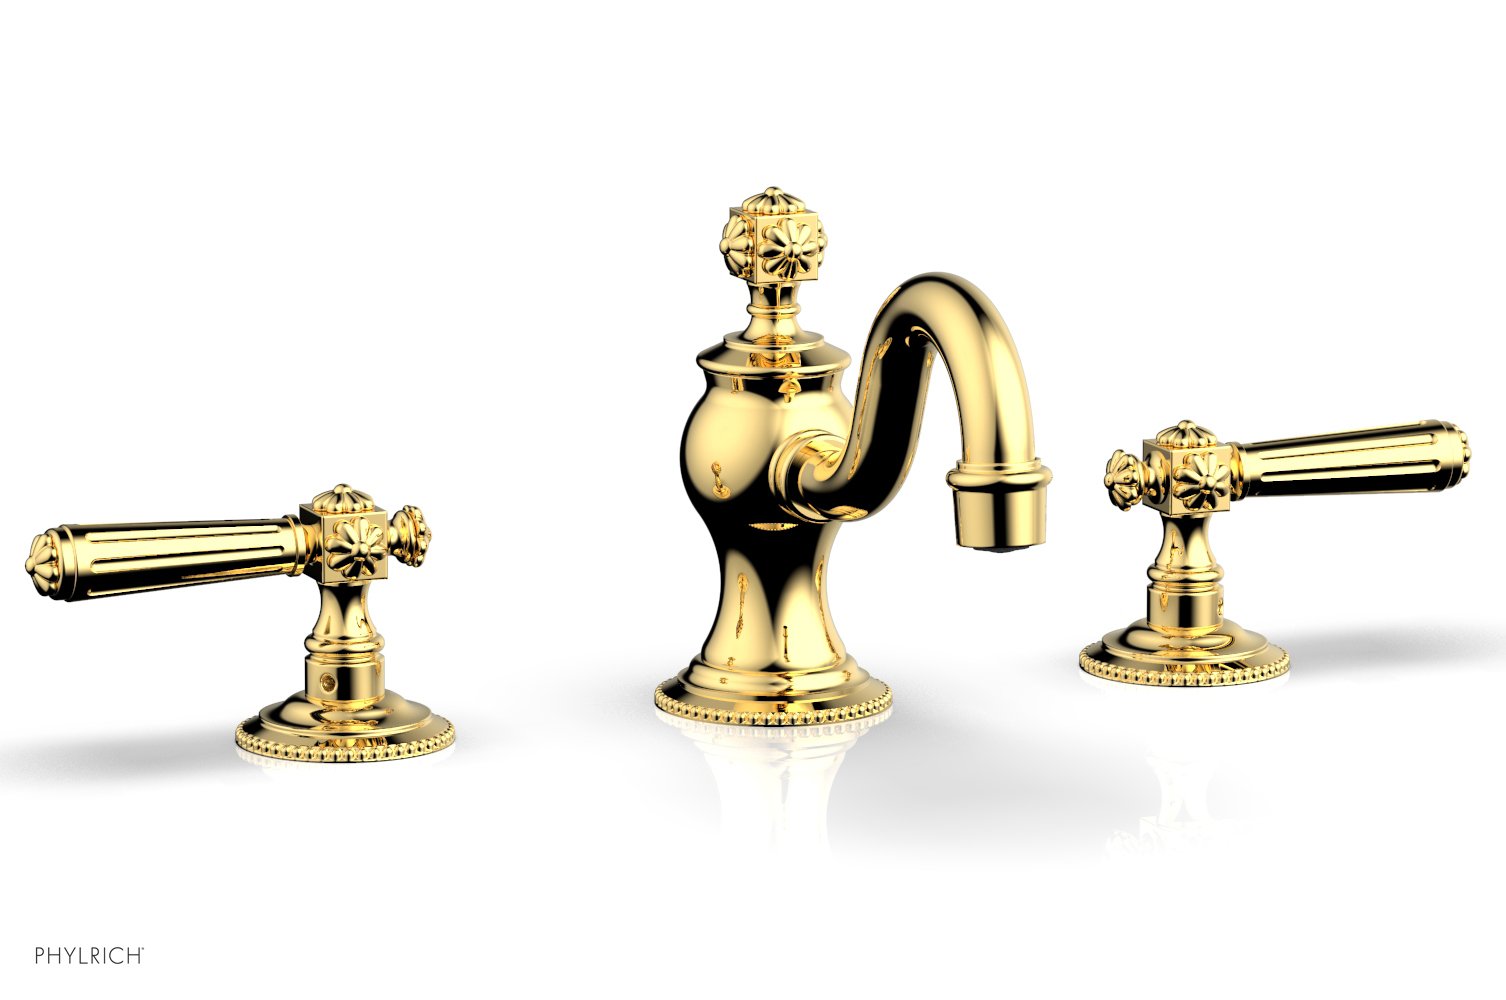 Phylrich MARVELLE Widespread Faucet lever Handles